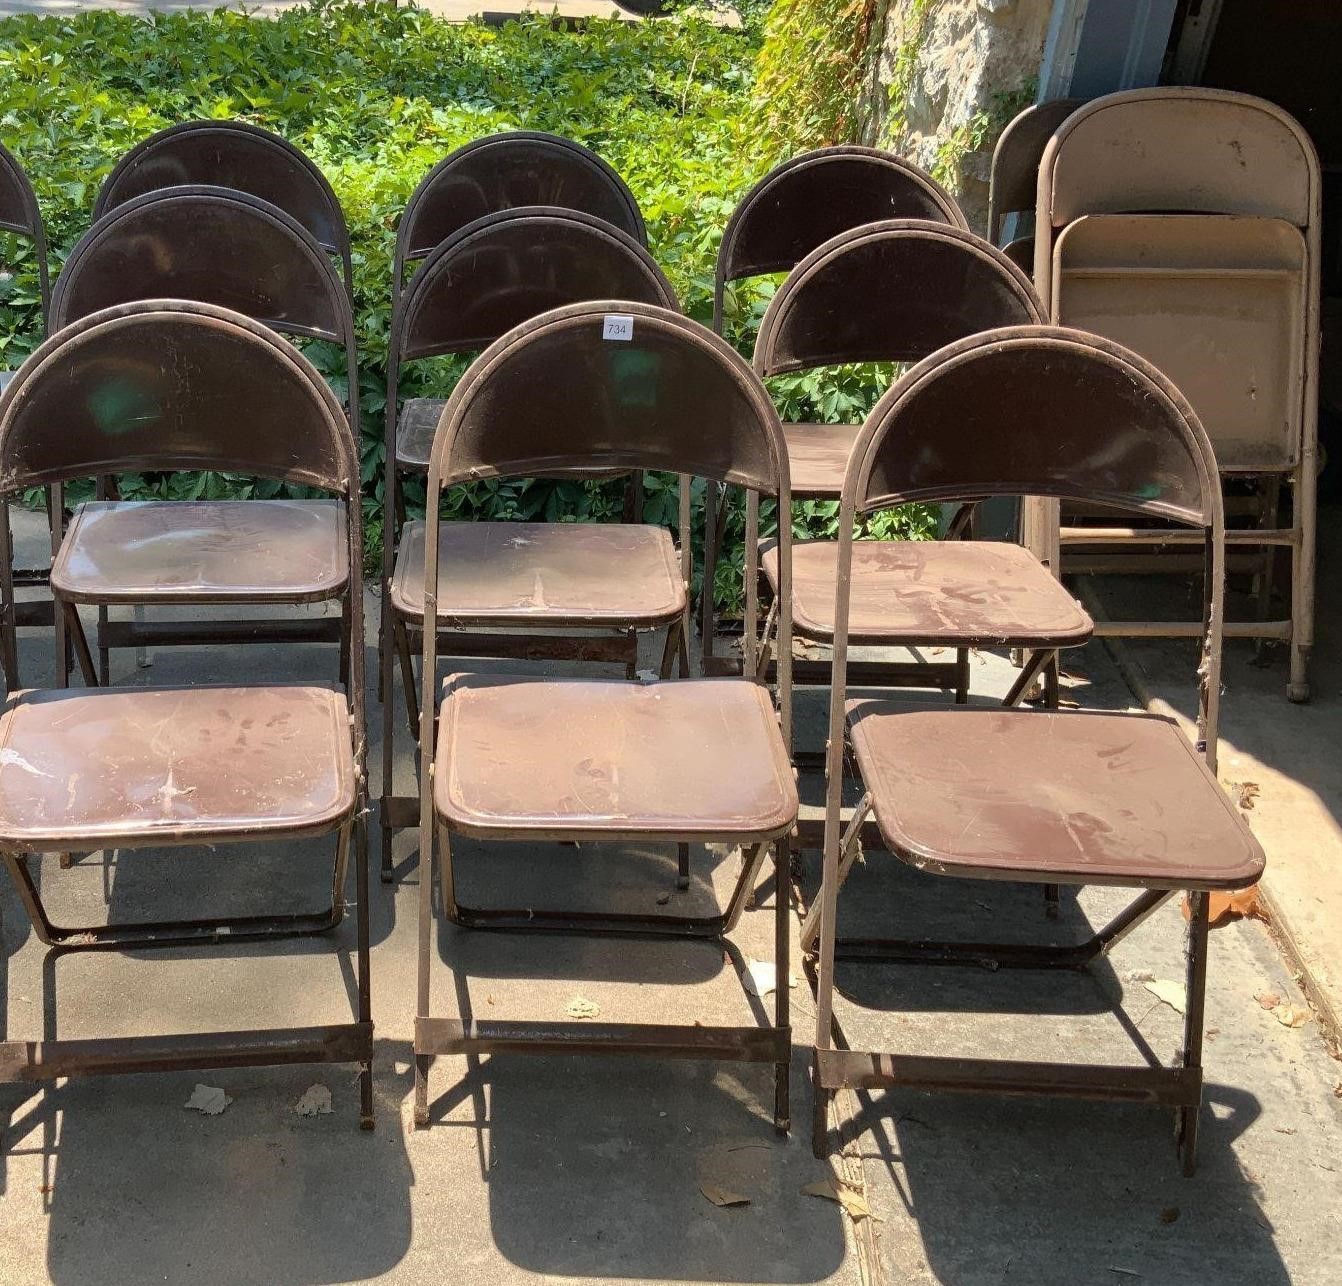 10 Matched Metal Folding Chairs + 3